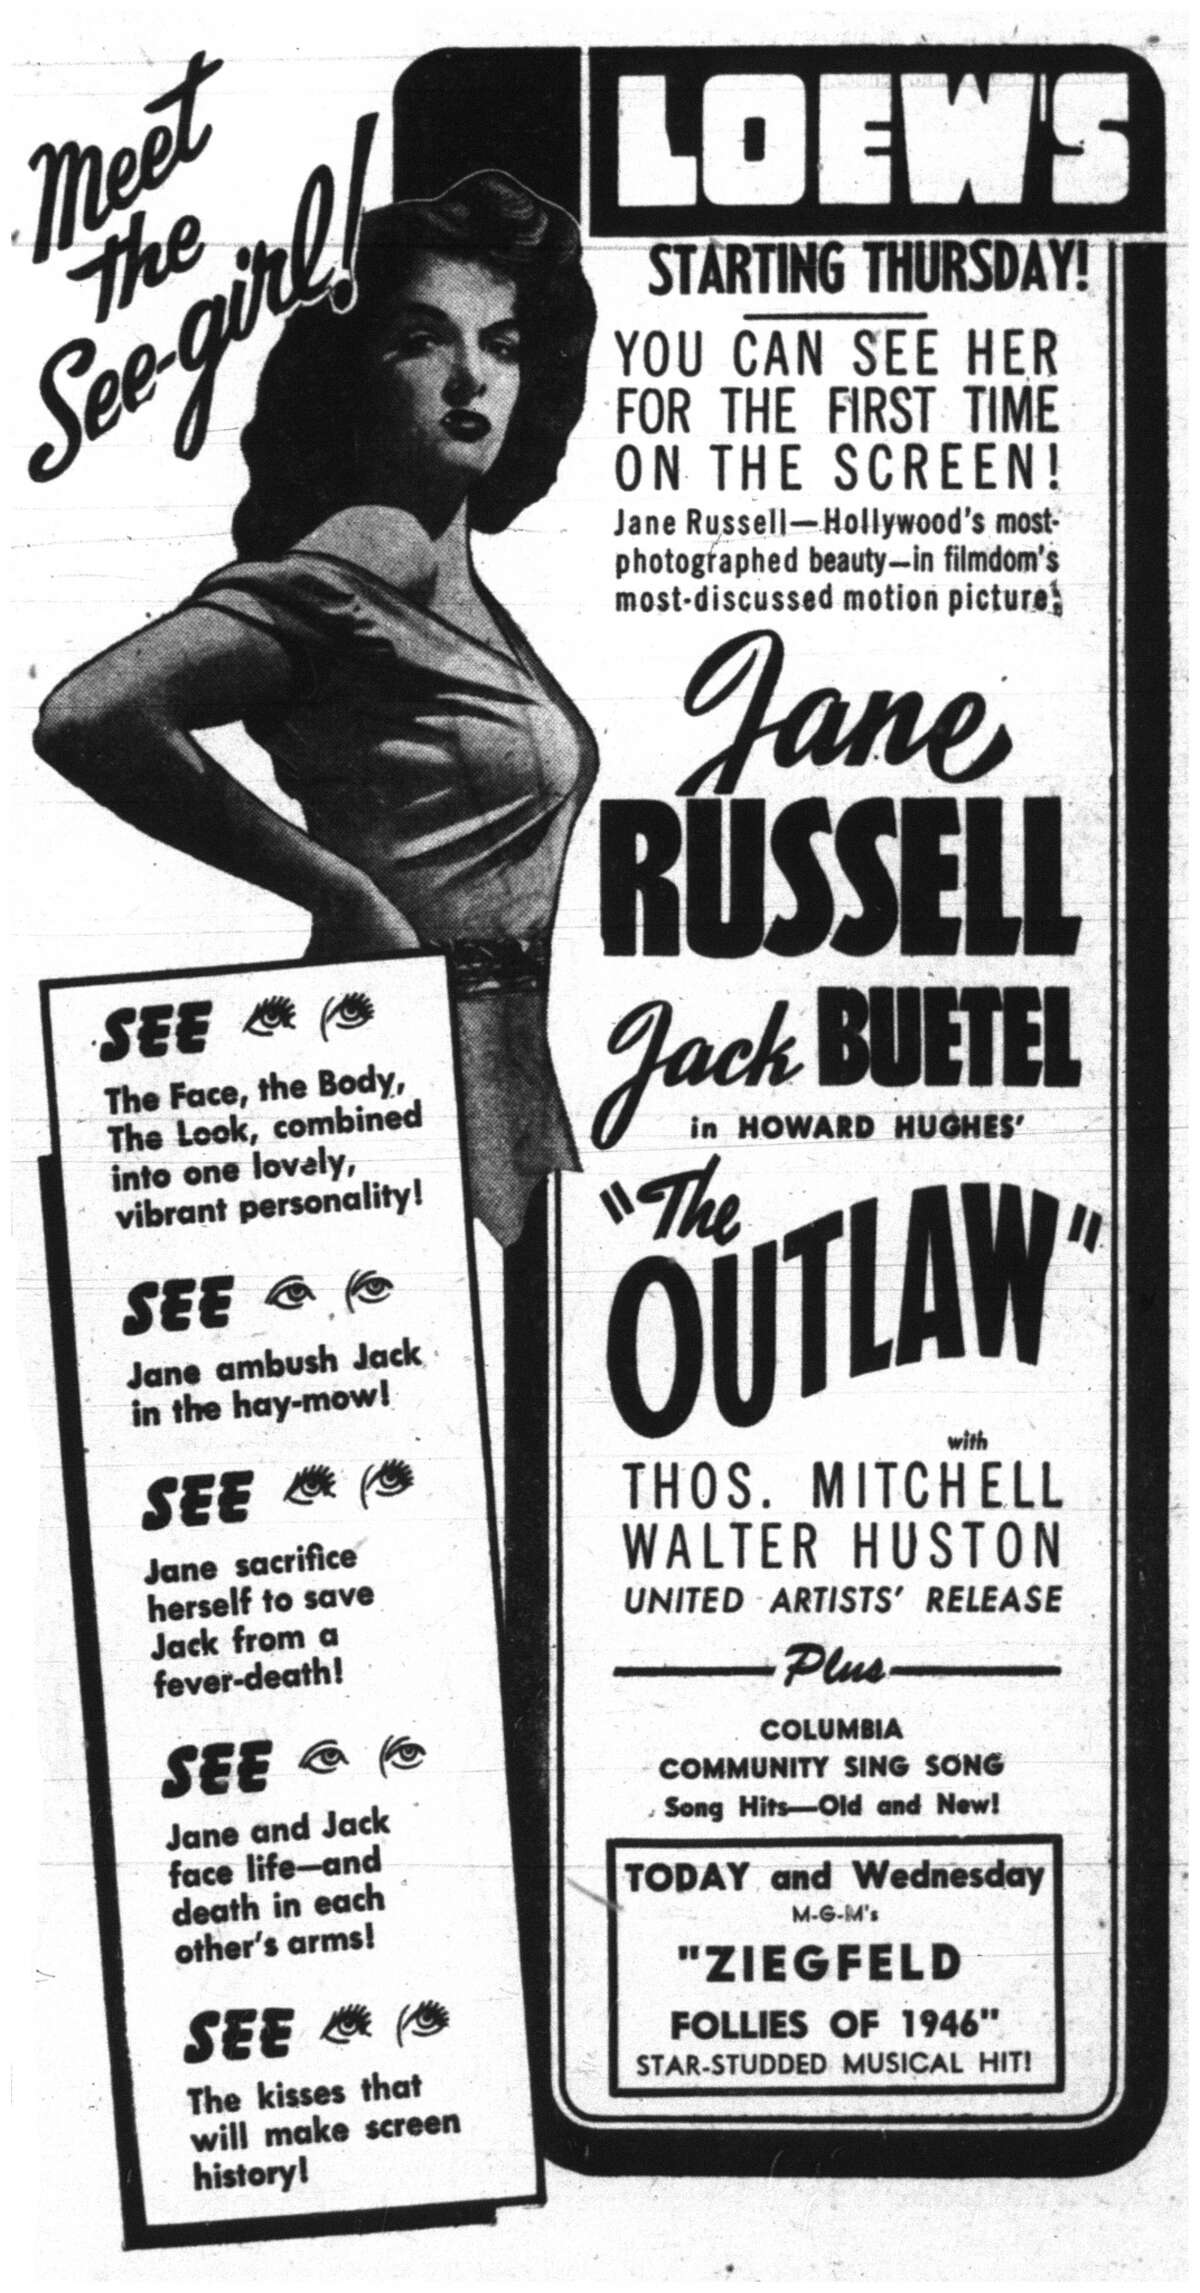 Newspaper advertisement for "The Outlaw" days before its Houston debut.